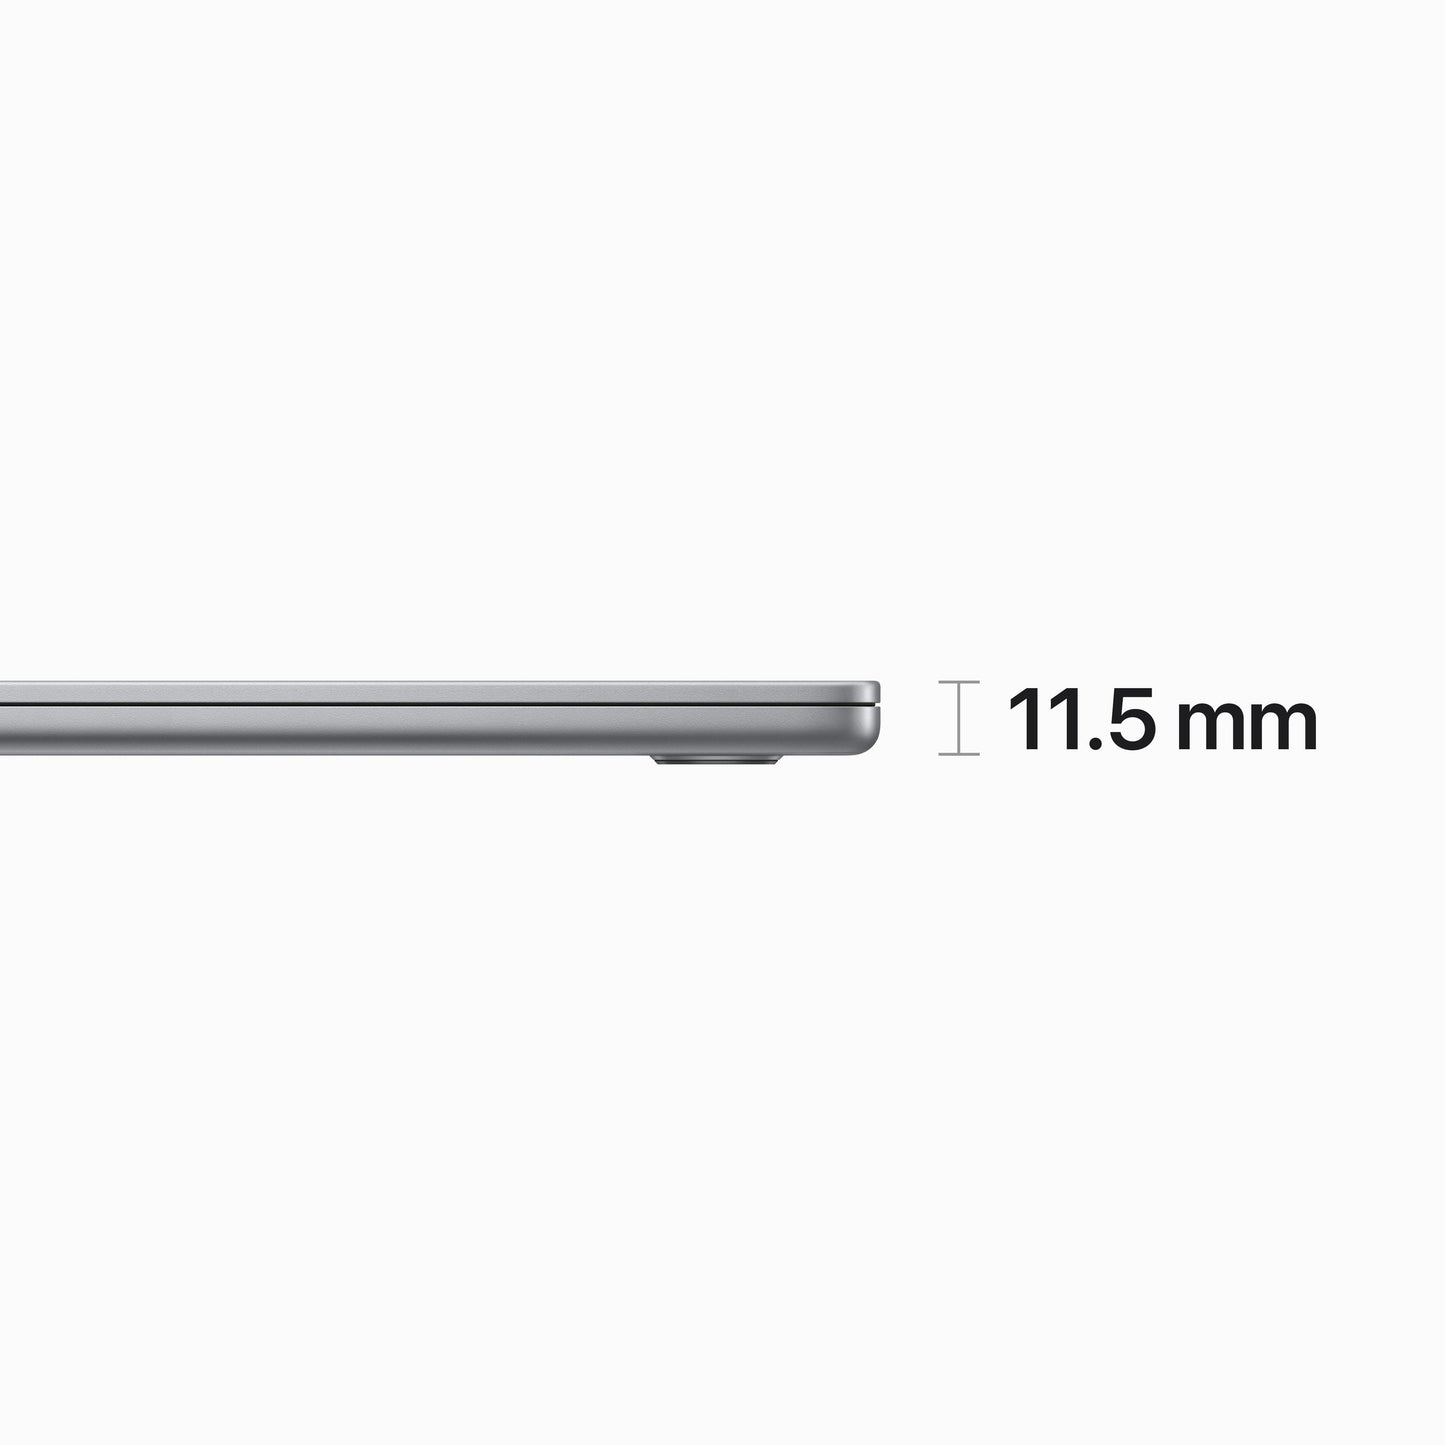 15-inch MacBook Air: Apple M2 chip with 8-core CPU and 10-core GPU, 512GB SSD - Space Grey